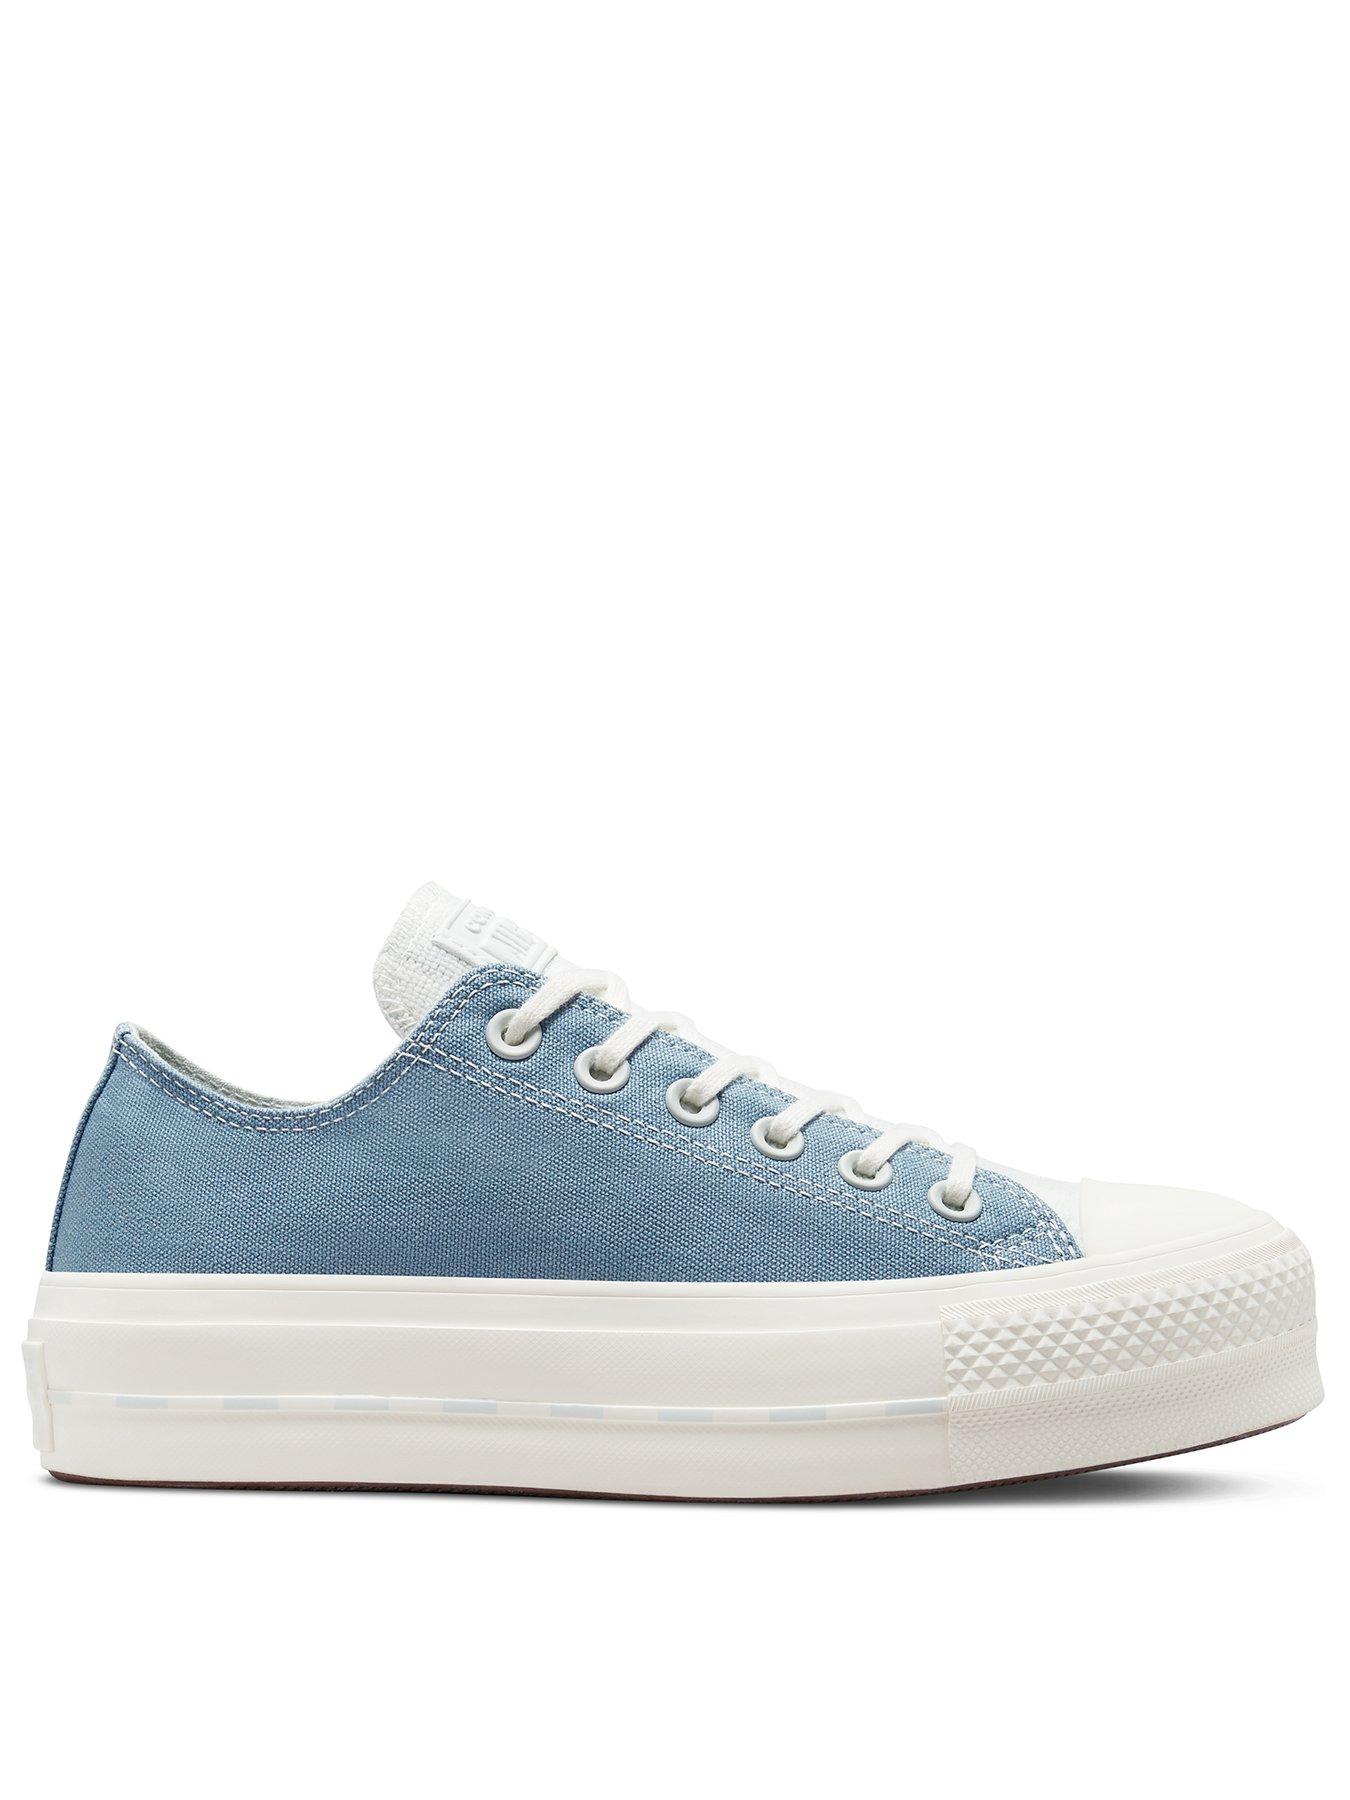 Trainers Chuck Taylor All Star Lift Crafted Canvas Platform Ox Plimsoll - Blue/Silver